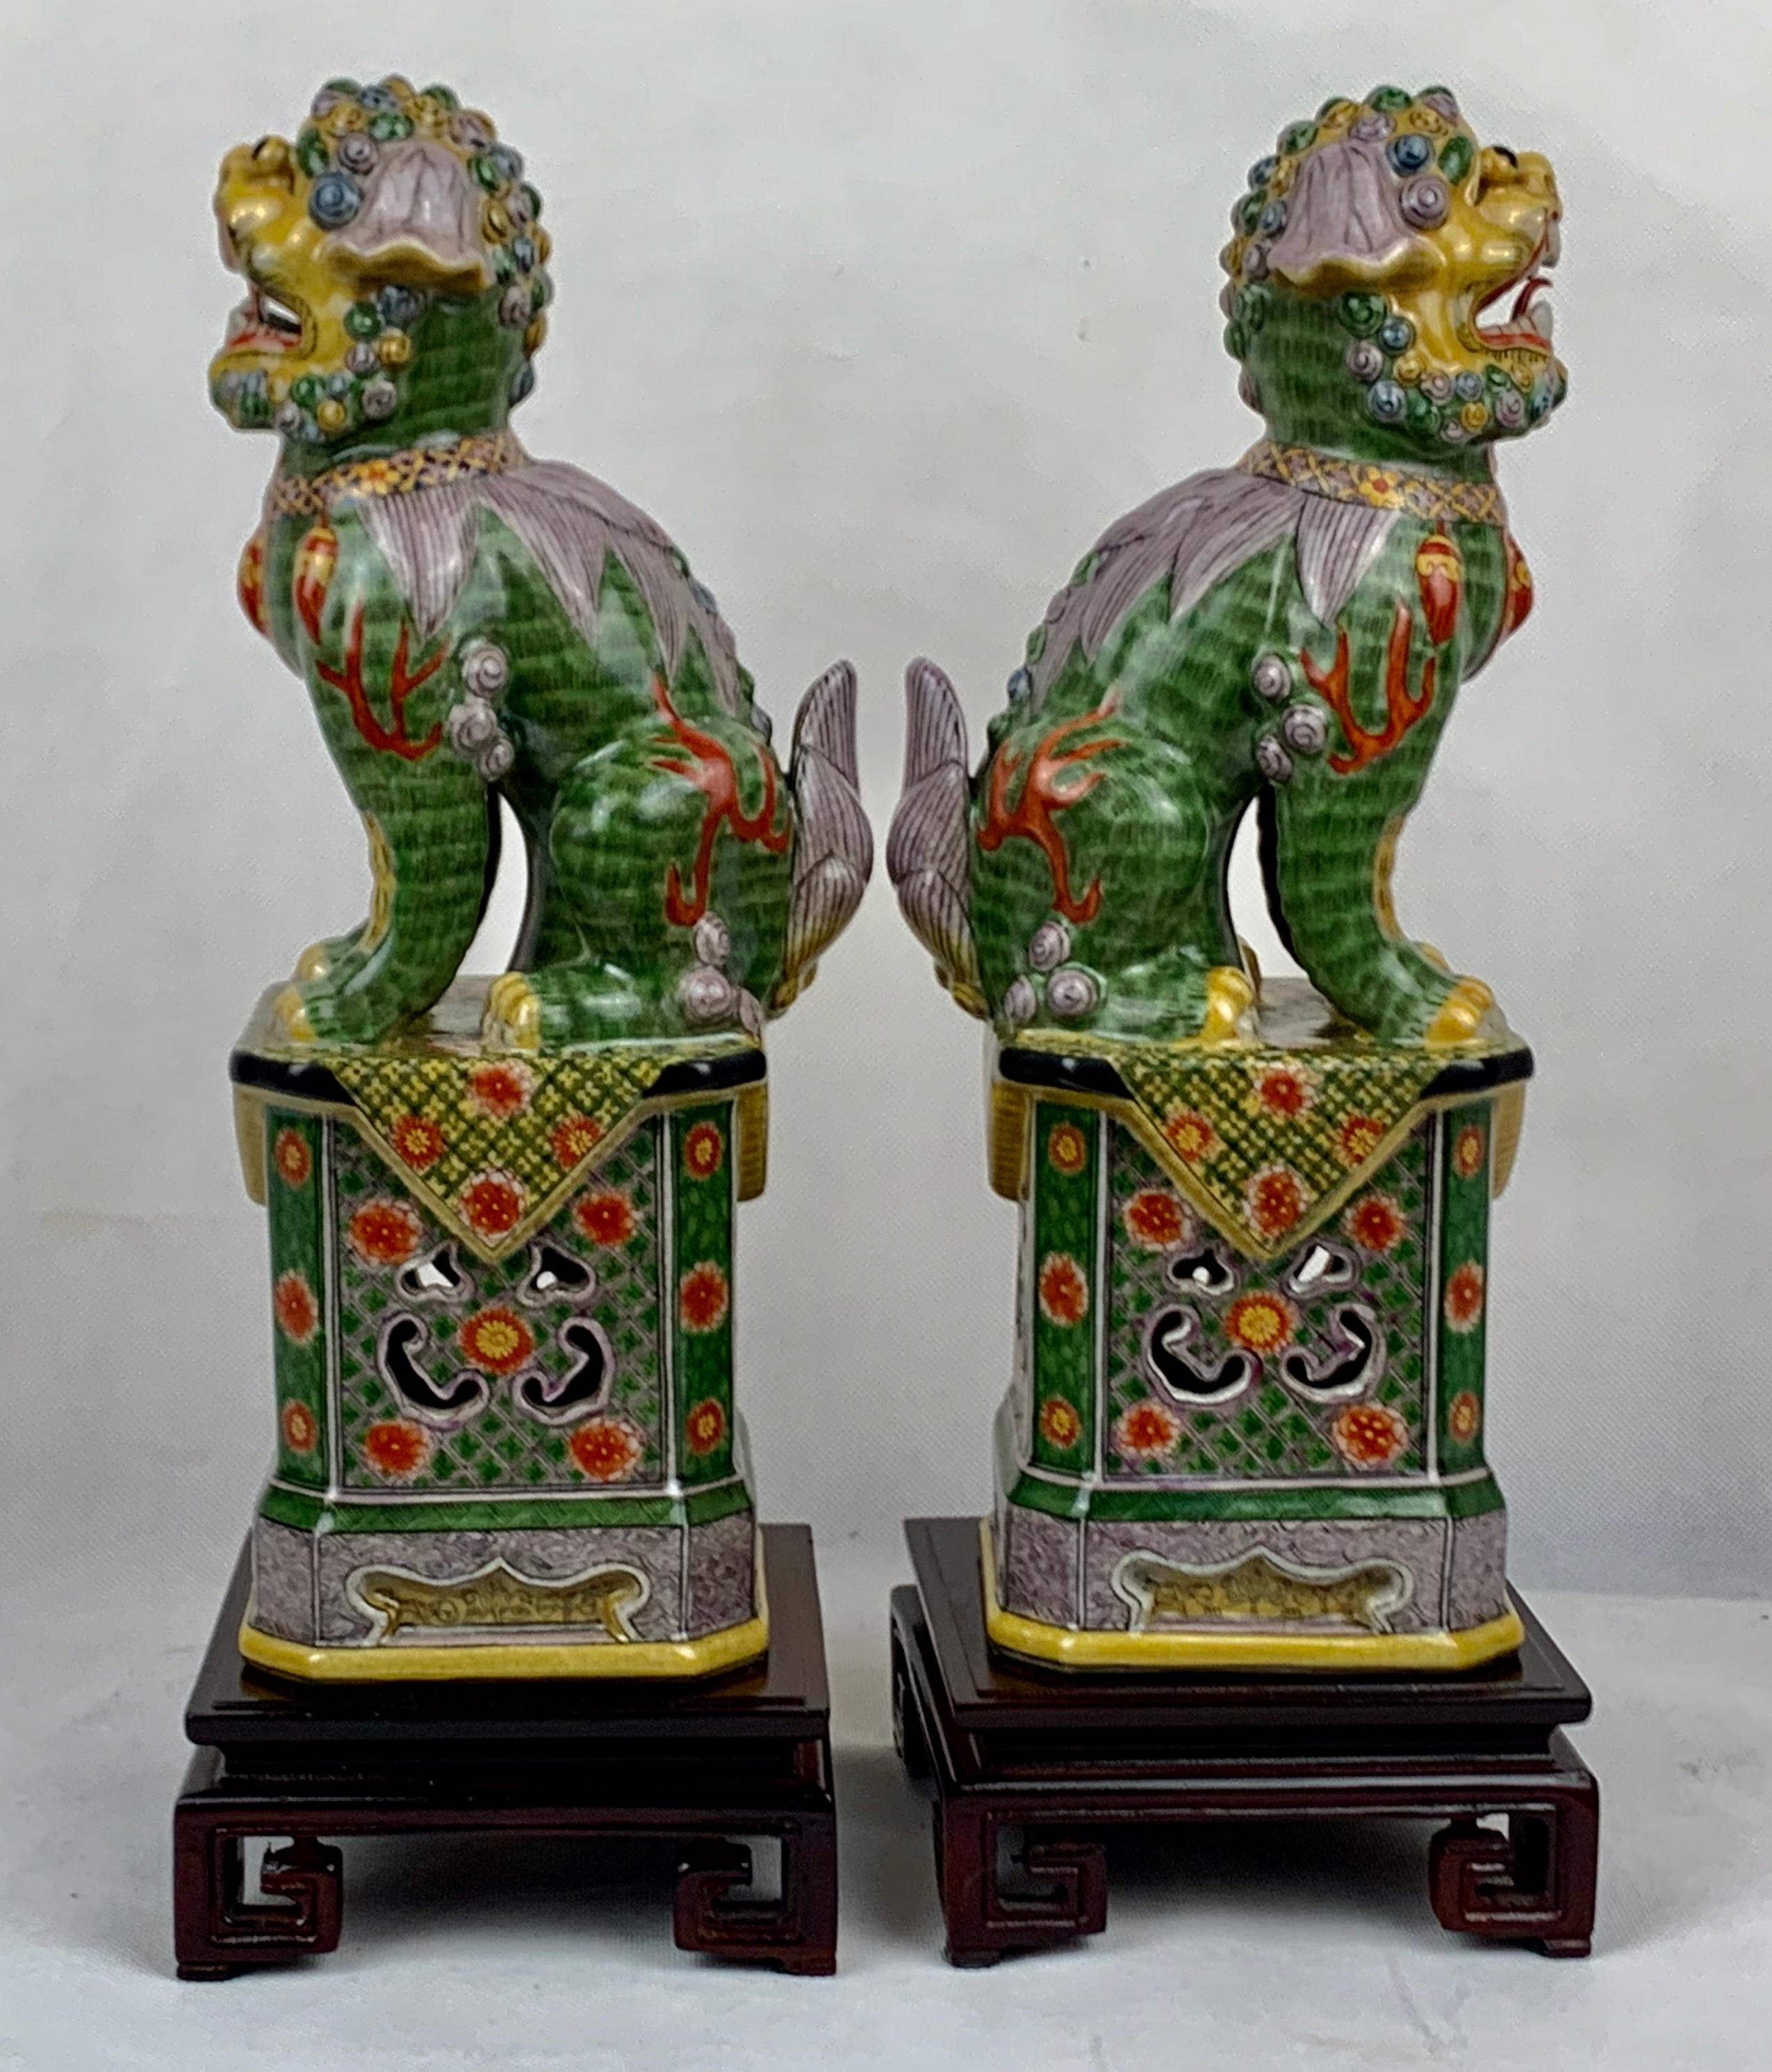 Chinoiserie Pair of Polychromed Porcelain Chinese Foo Dogs on Stands-Green, Yellow, Red